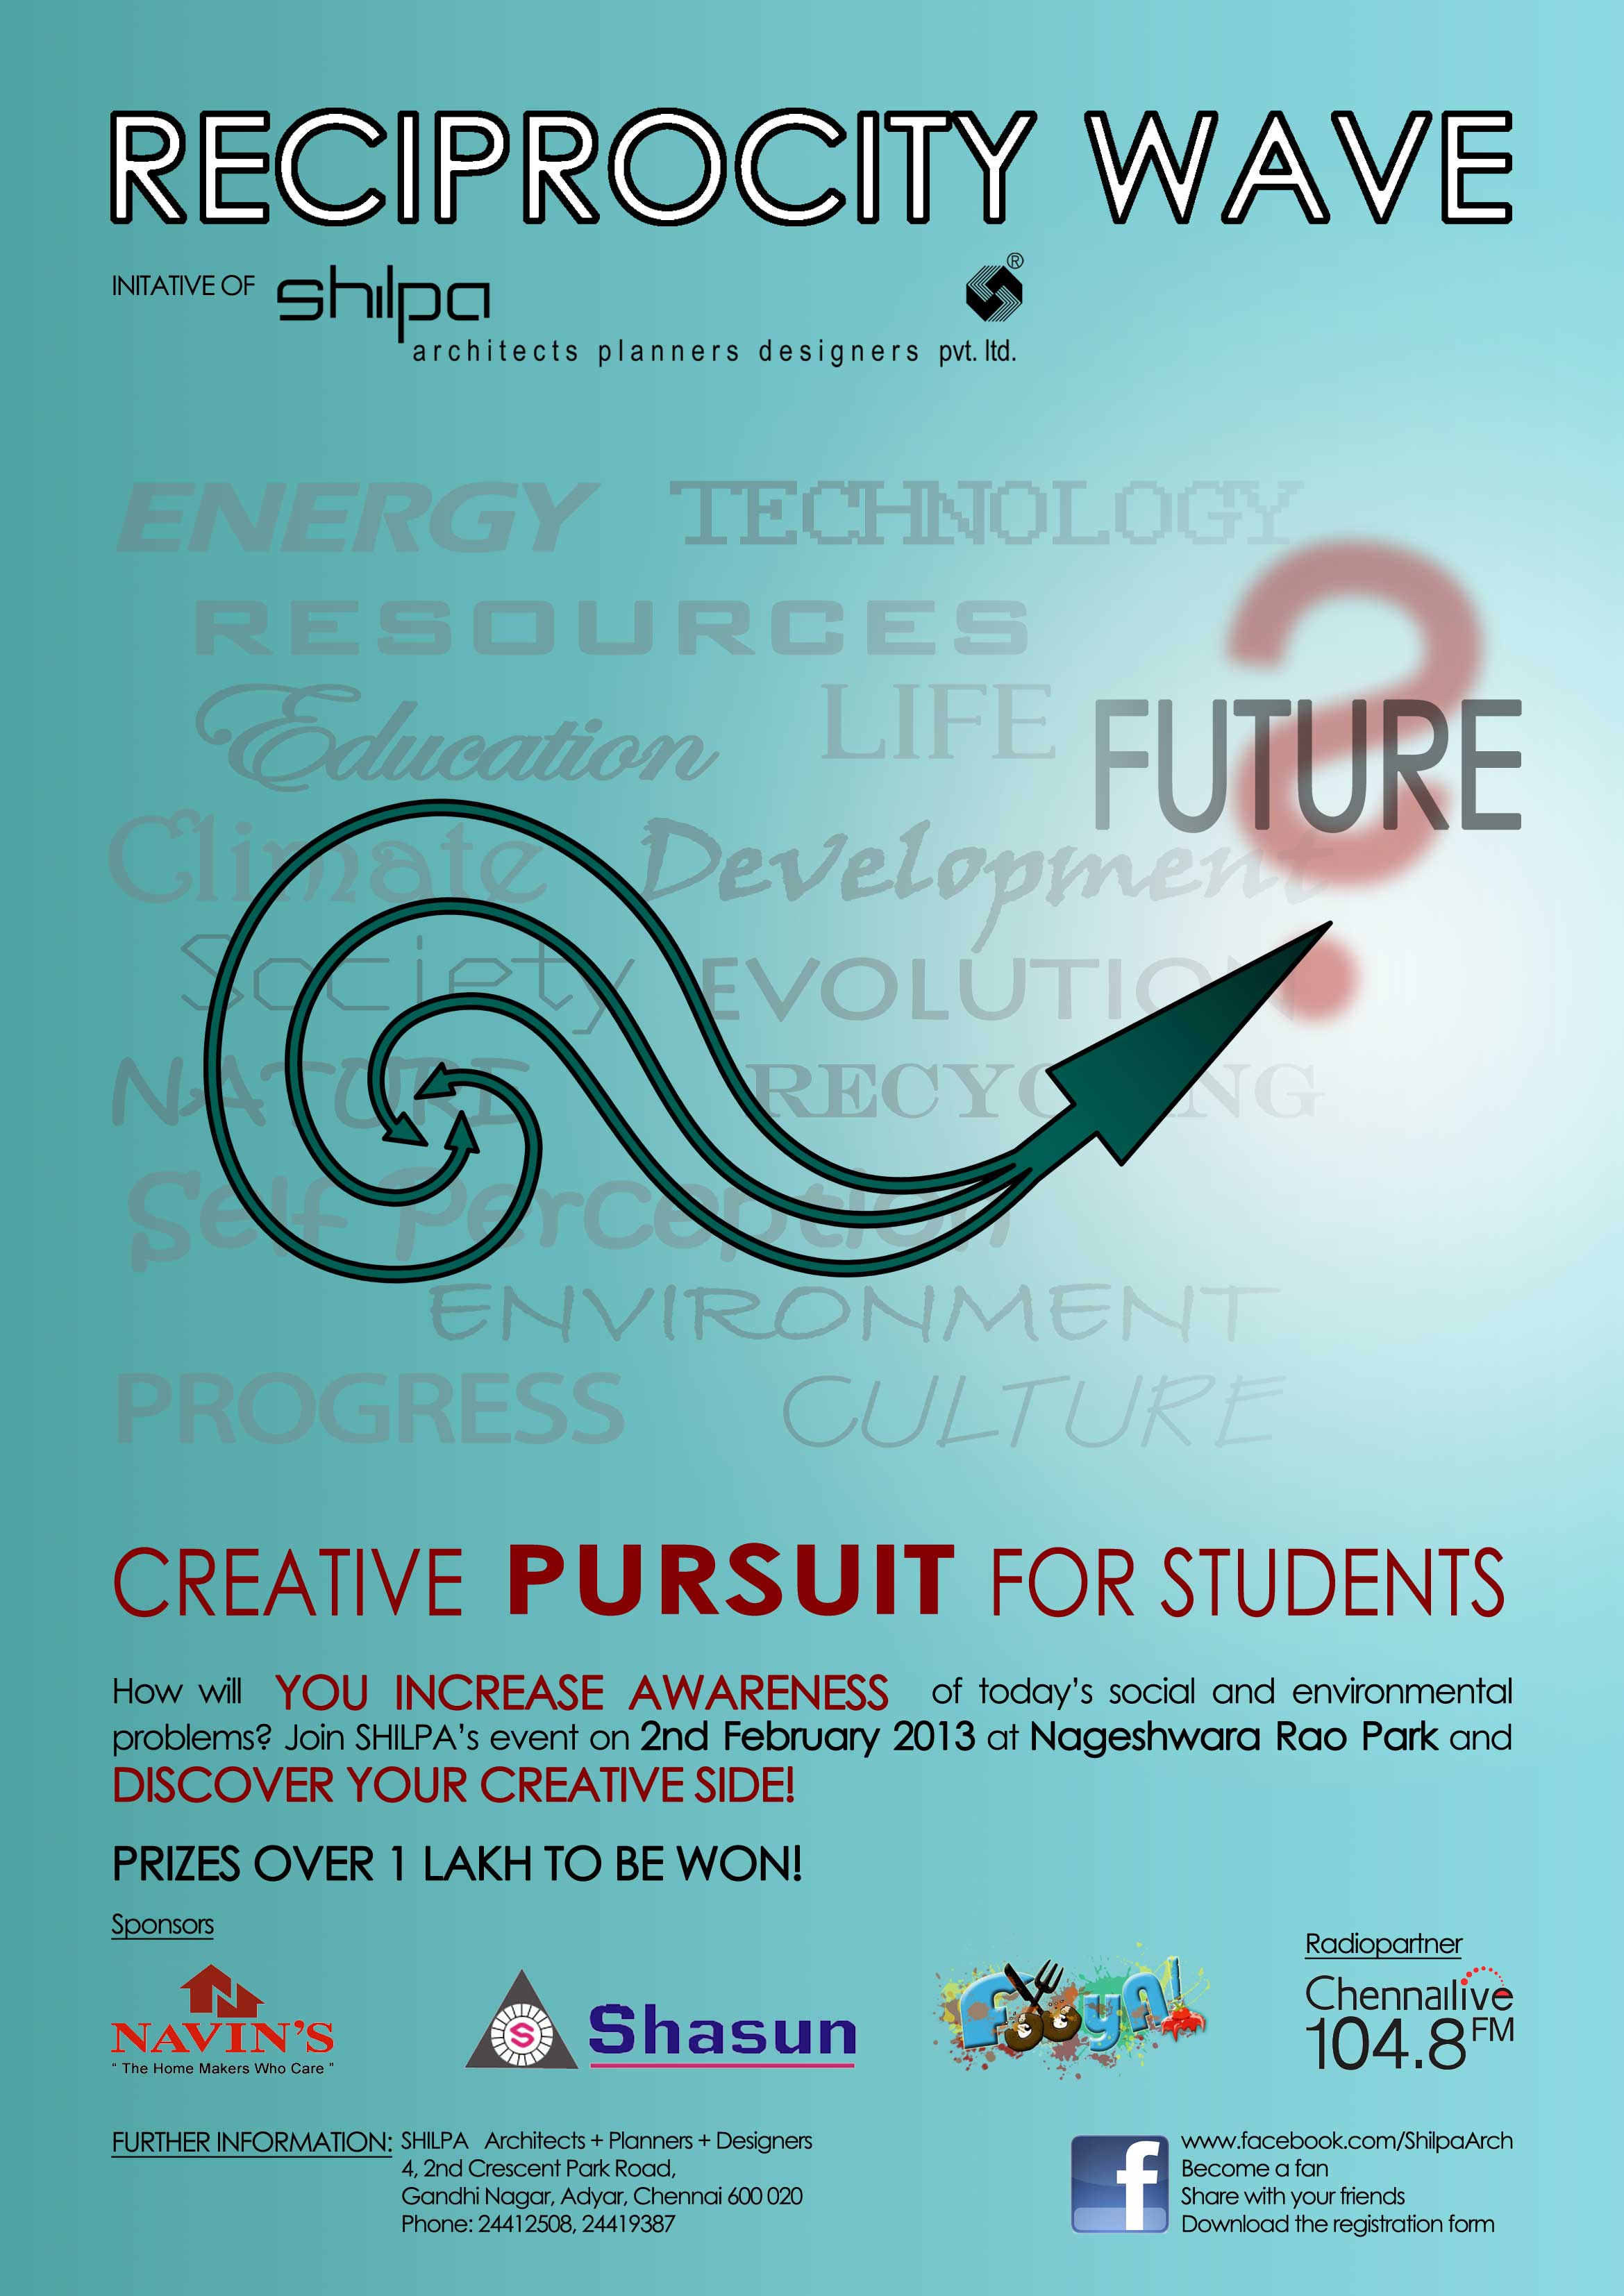 Shilpa Architects: Reciprocity Wave - Creative Pursuit for Students